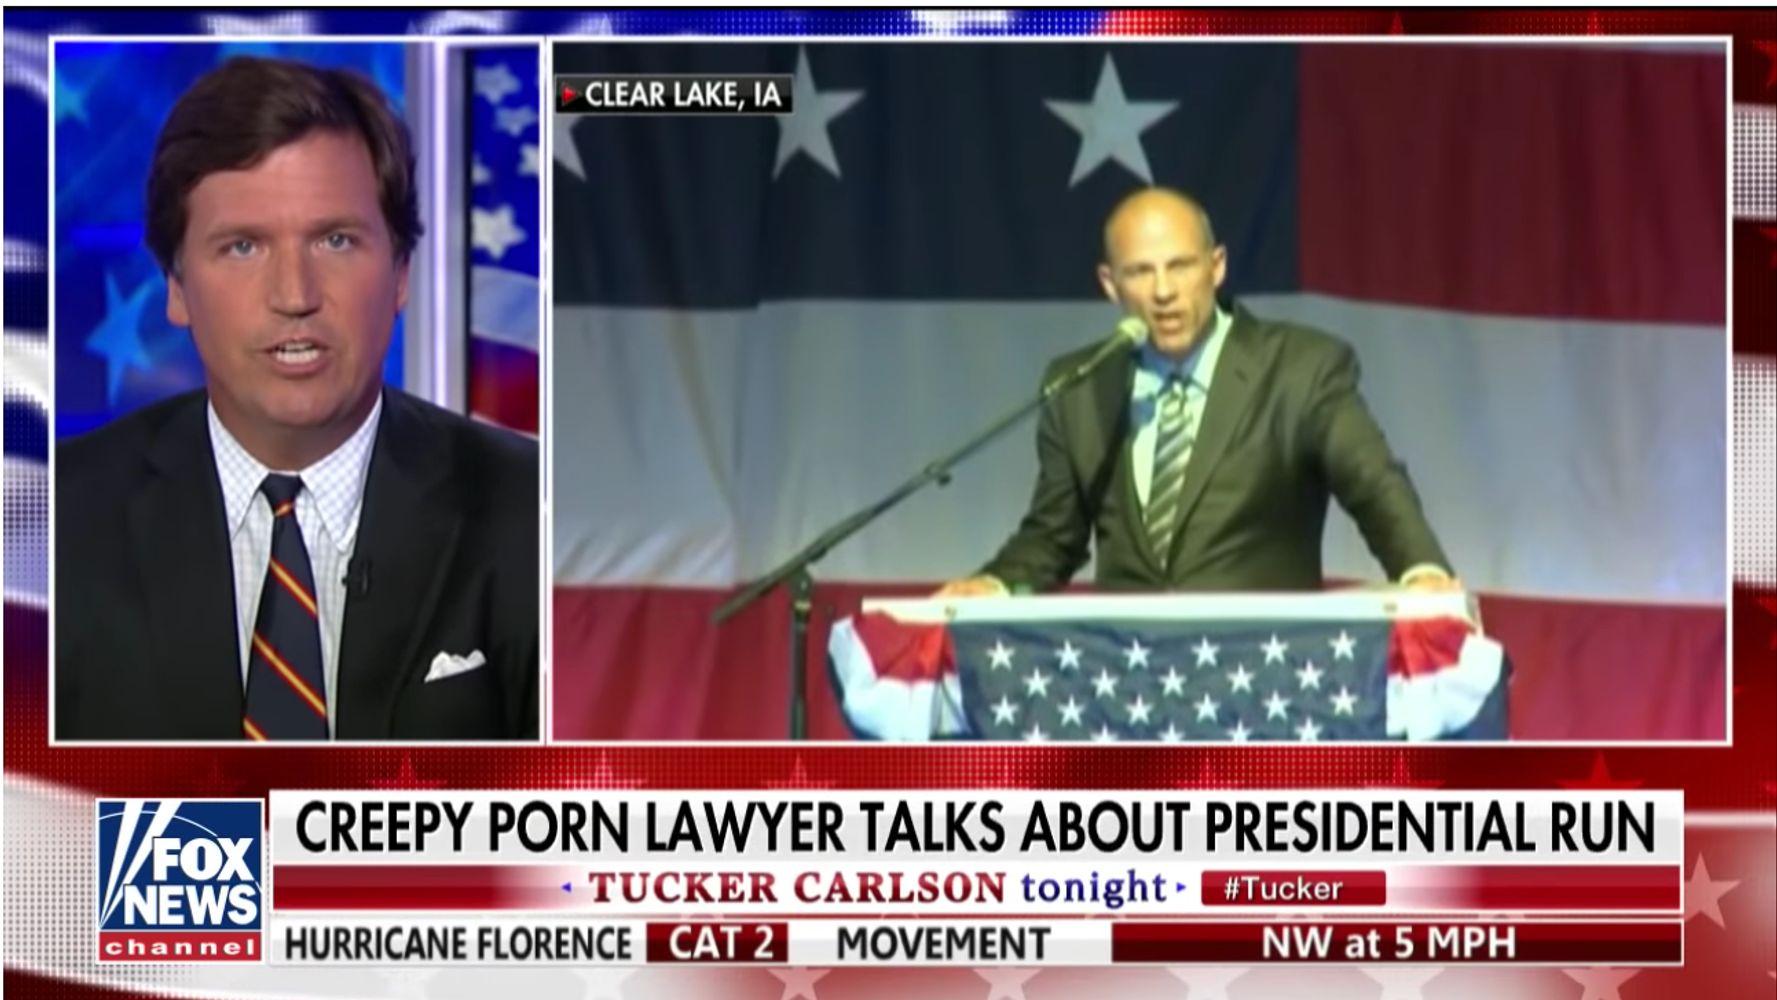 Fox News 'Creepy Porn Lawyer' Interview Branded 'Complete Garbage' |  HuffPost UK News